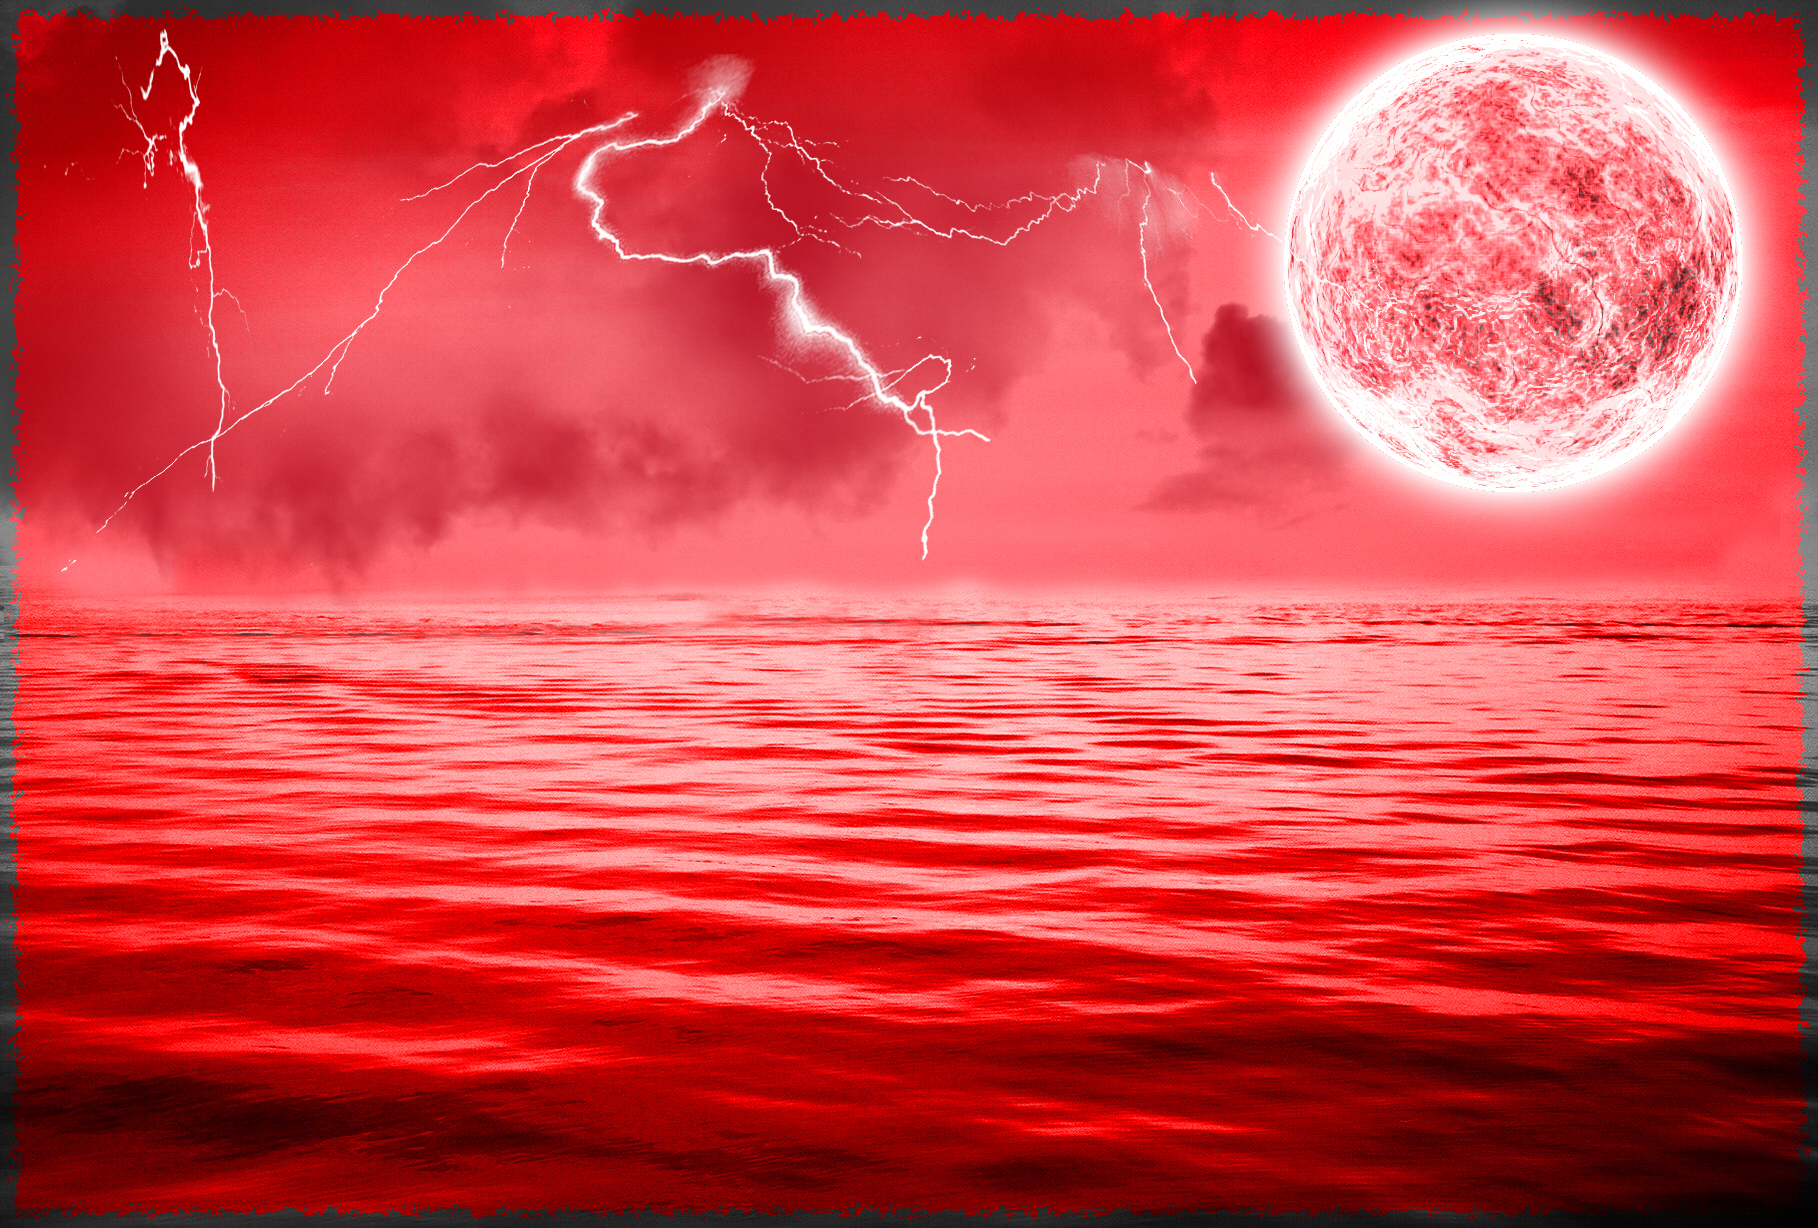 Red Water Planet by LucianAdamson on DeviantArt